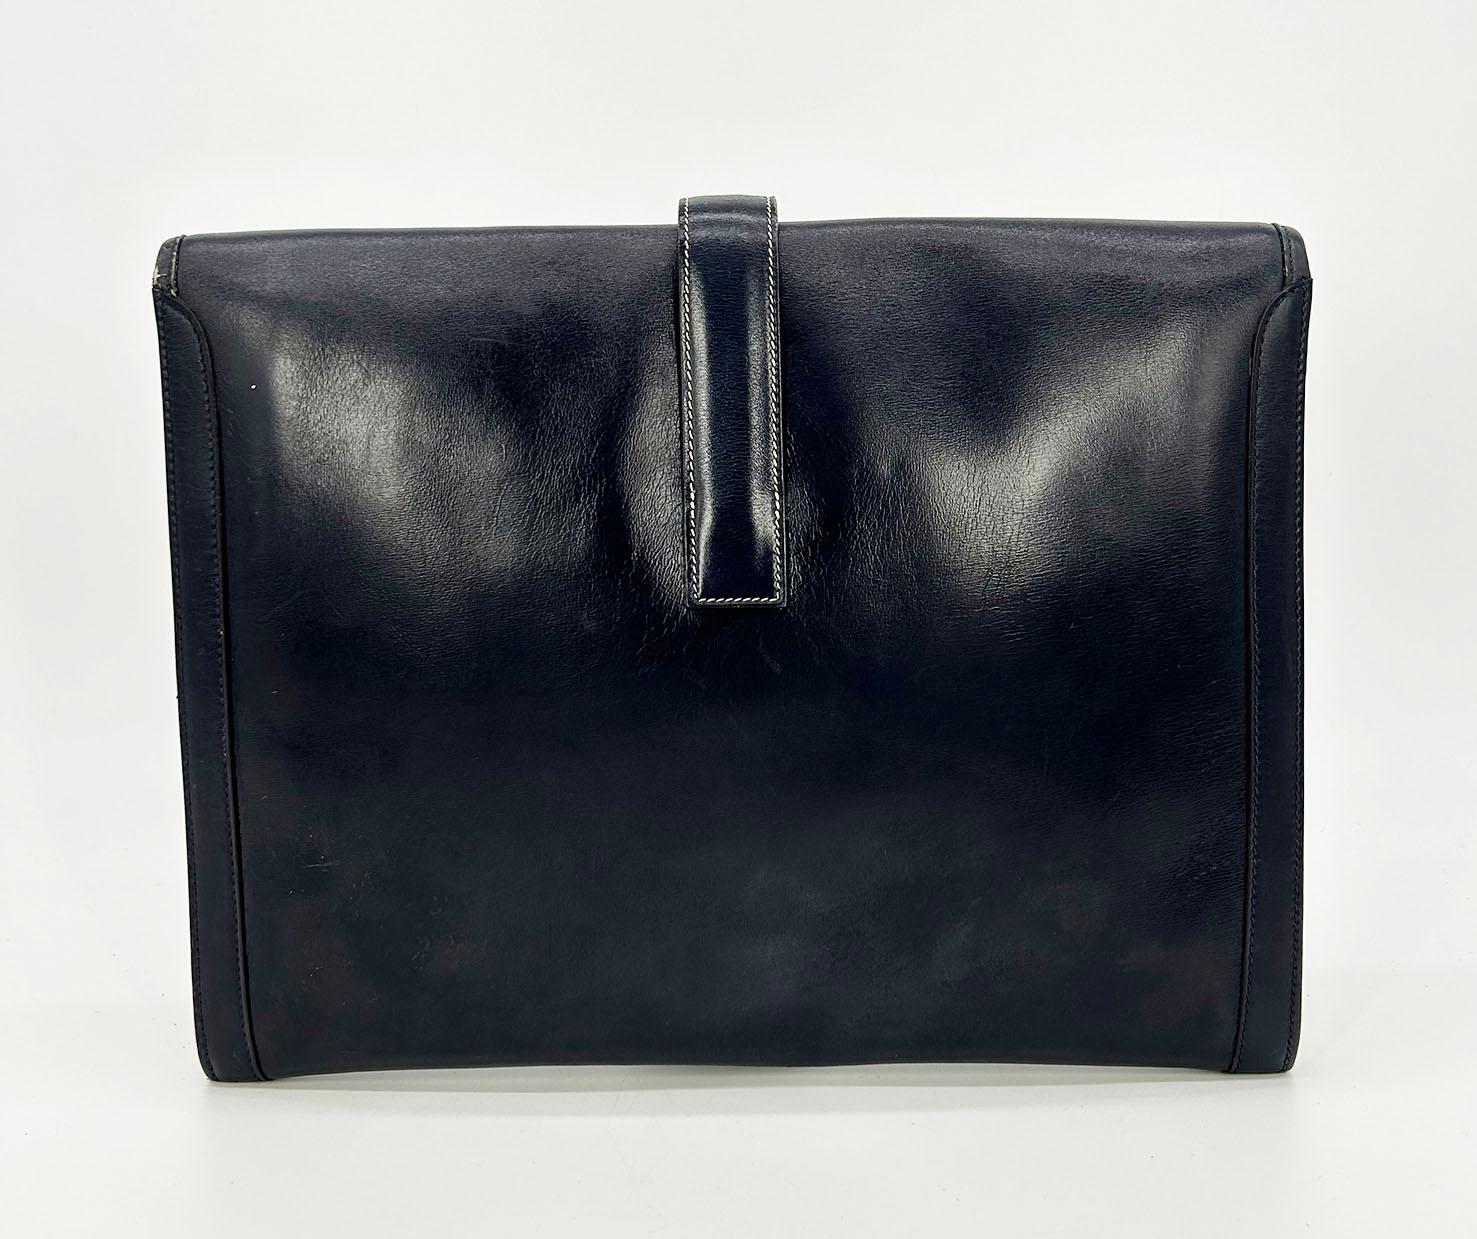 Hermes Vintage Navy Box Calf Jige Clutch In Fair Condition For Sale In Philadelphia, PA